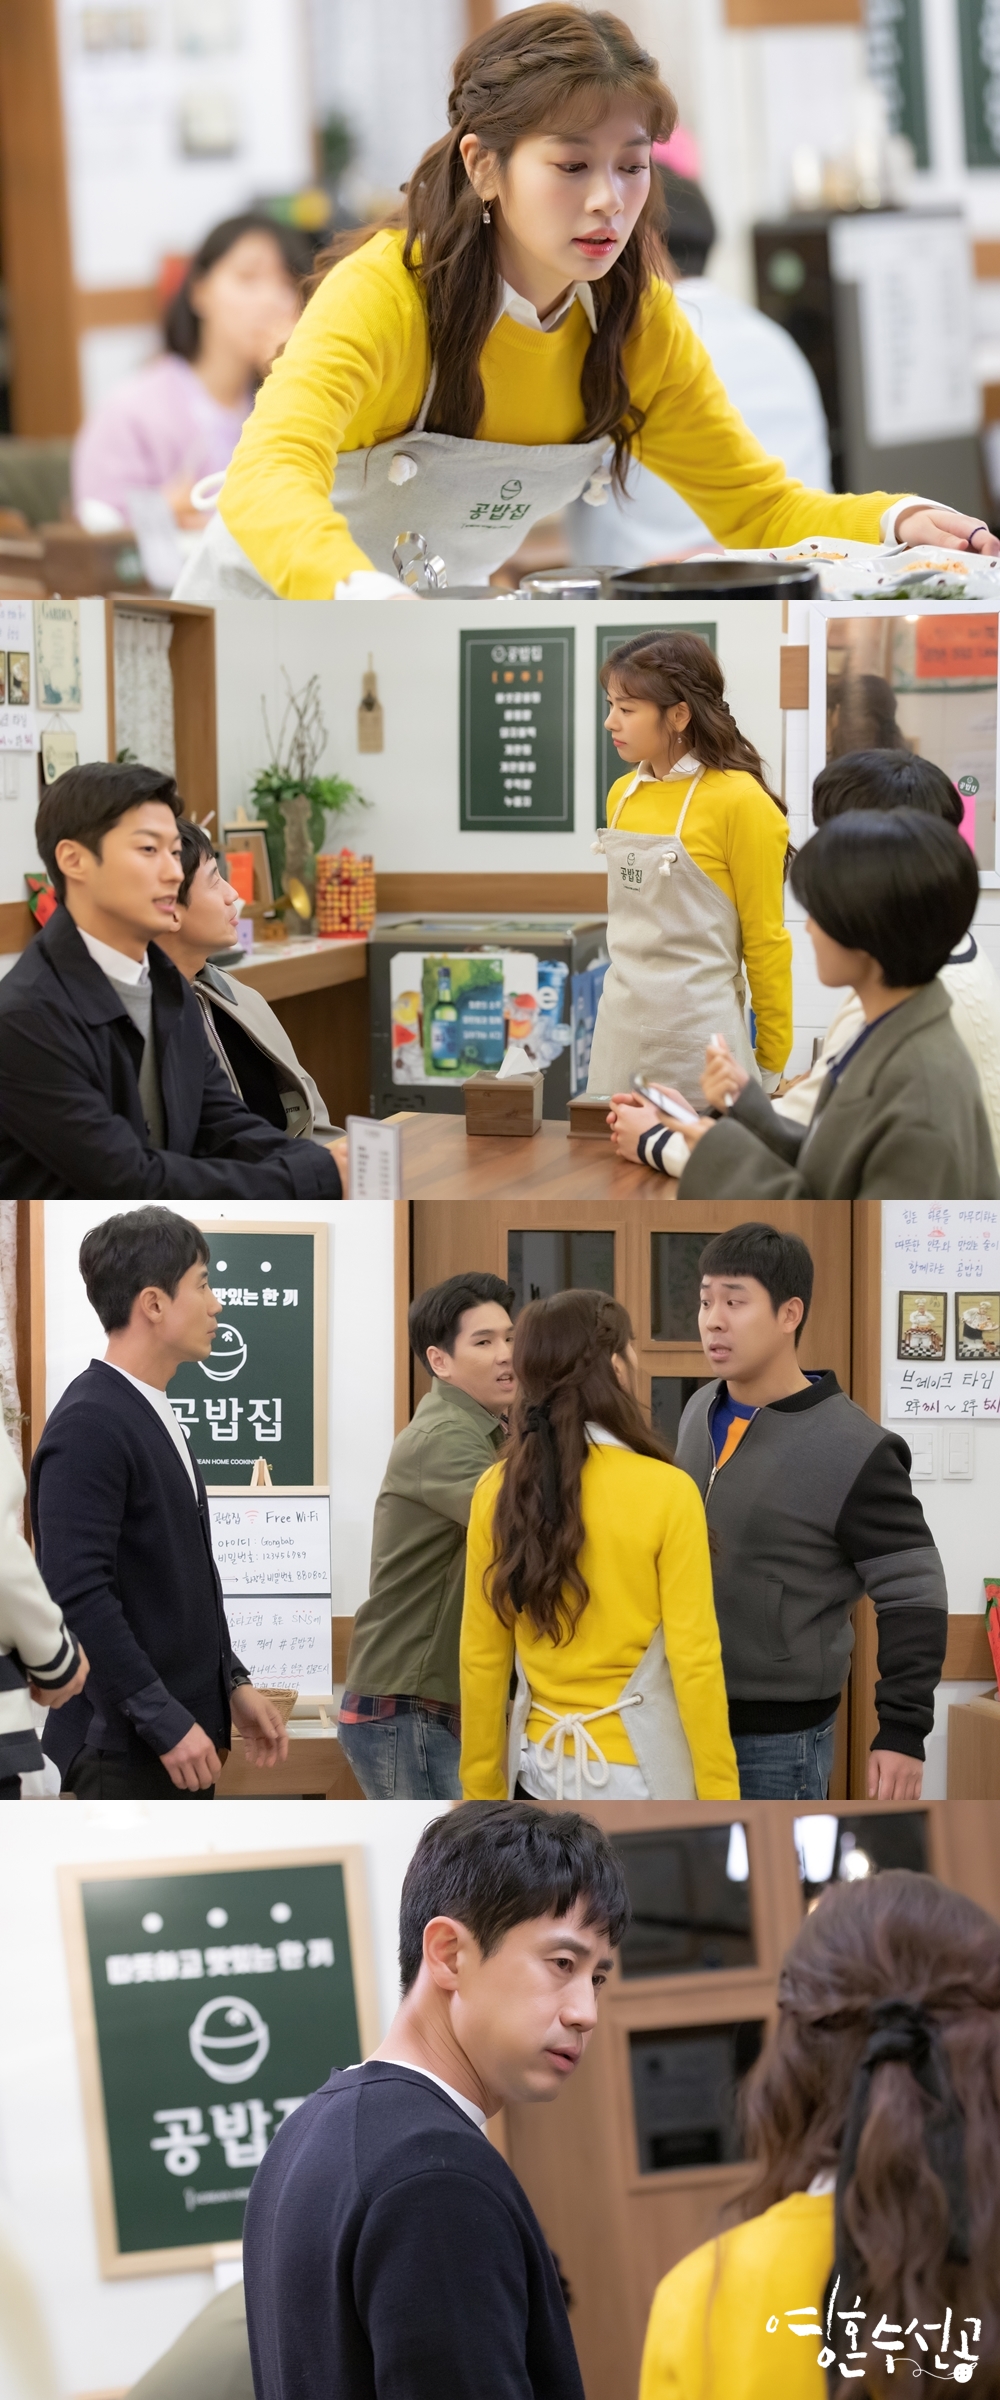 Soul So-min Shin Ha-kyun was seen looking at Jung So-min, who transformed into a baby chick, a rice bowl house, with anxiety eyes.Jung So-min, who is facing the drunk with a rough force, and Shin Ha-kyun, who looks at it with anxiety eyes, raises questions about what happened to the two.On the 13th, KBS 2TV tree drama Soul Soo-gong (played by Lee Hyang-hee, directed by Yoo Hyun-ki) released a still showing scenes of Lee Si-jun, a geek doctor, watching Han Space (Jung So-min) while running Anxiety Radar ahead of the 5-6th broadcast.Soul Sui Seon is a heart prescription that tells the story of psychiatrists who believe that they are healing rather than treating a sick person.Acting actors such as Shin Ha-kyun, Jung So-min, Tae In-ho and Park Ye-jin are the works of Lee Hyang, Brain, Study God, My Daughter Seo Young-yiIn the last 1-4 broadcasts, the geeky psychiatrist collided with Space, who has intermittent explosive disorder, to raise the expectation of the relationship between the two.In the meantime, the photo released showed the scene where the co-chairman led the psychiatric resident friendship (Andong-gu) and Ji-hee (Park Han-sol) to find a rice ball house of Ji-sun (Jin-min-kyung) and faced Space, who was transformed into a part-time student of a young chick.The collimator and colleagues continue their meal in a cheerful atmosphere thanks to the warm part-time space.But suddenly the atmosphere is freezing rapidly, and the collimation is running Anxiety Radar to look at Space.Space turns from a gentle figure and is tensely confronted with a restaurant drunk, which stimulates curiosity.Space, which is opposed to the customer, expresses uncomfortable signs, and the appearance of the collimator looking at him with a sharp expression catches the eye.It raises questions about why Space has been angry.The soul repairman said, Space transforms back into Angry mode while the collimation is watching.Space will be filled with empathy and sadness after the appearance of the collimation that carefully examines Space and the appearance of Space that wants to be confronted without being tolerated in an unexpected situation.I ask for your expectation, he said.